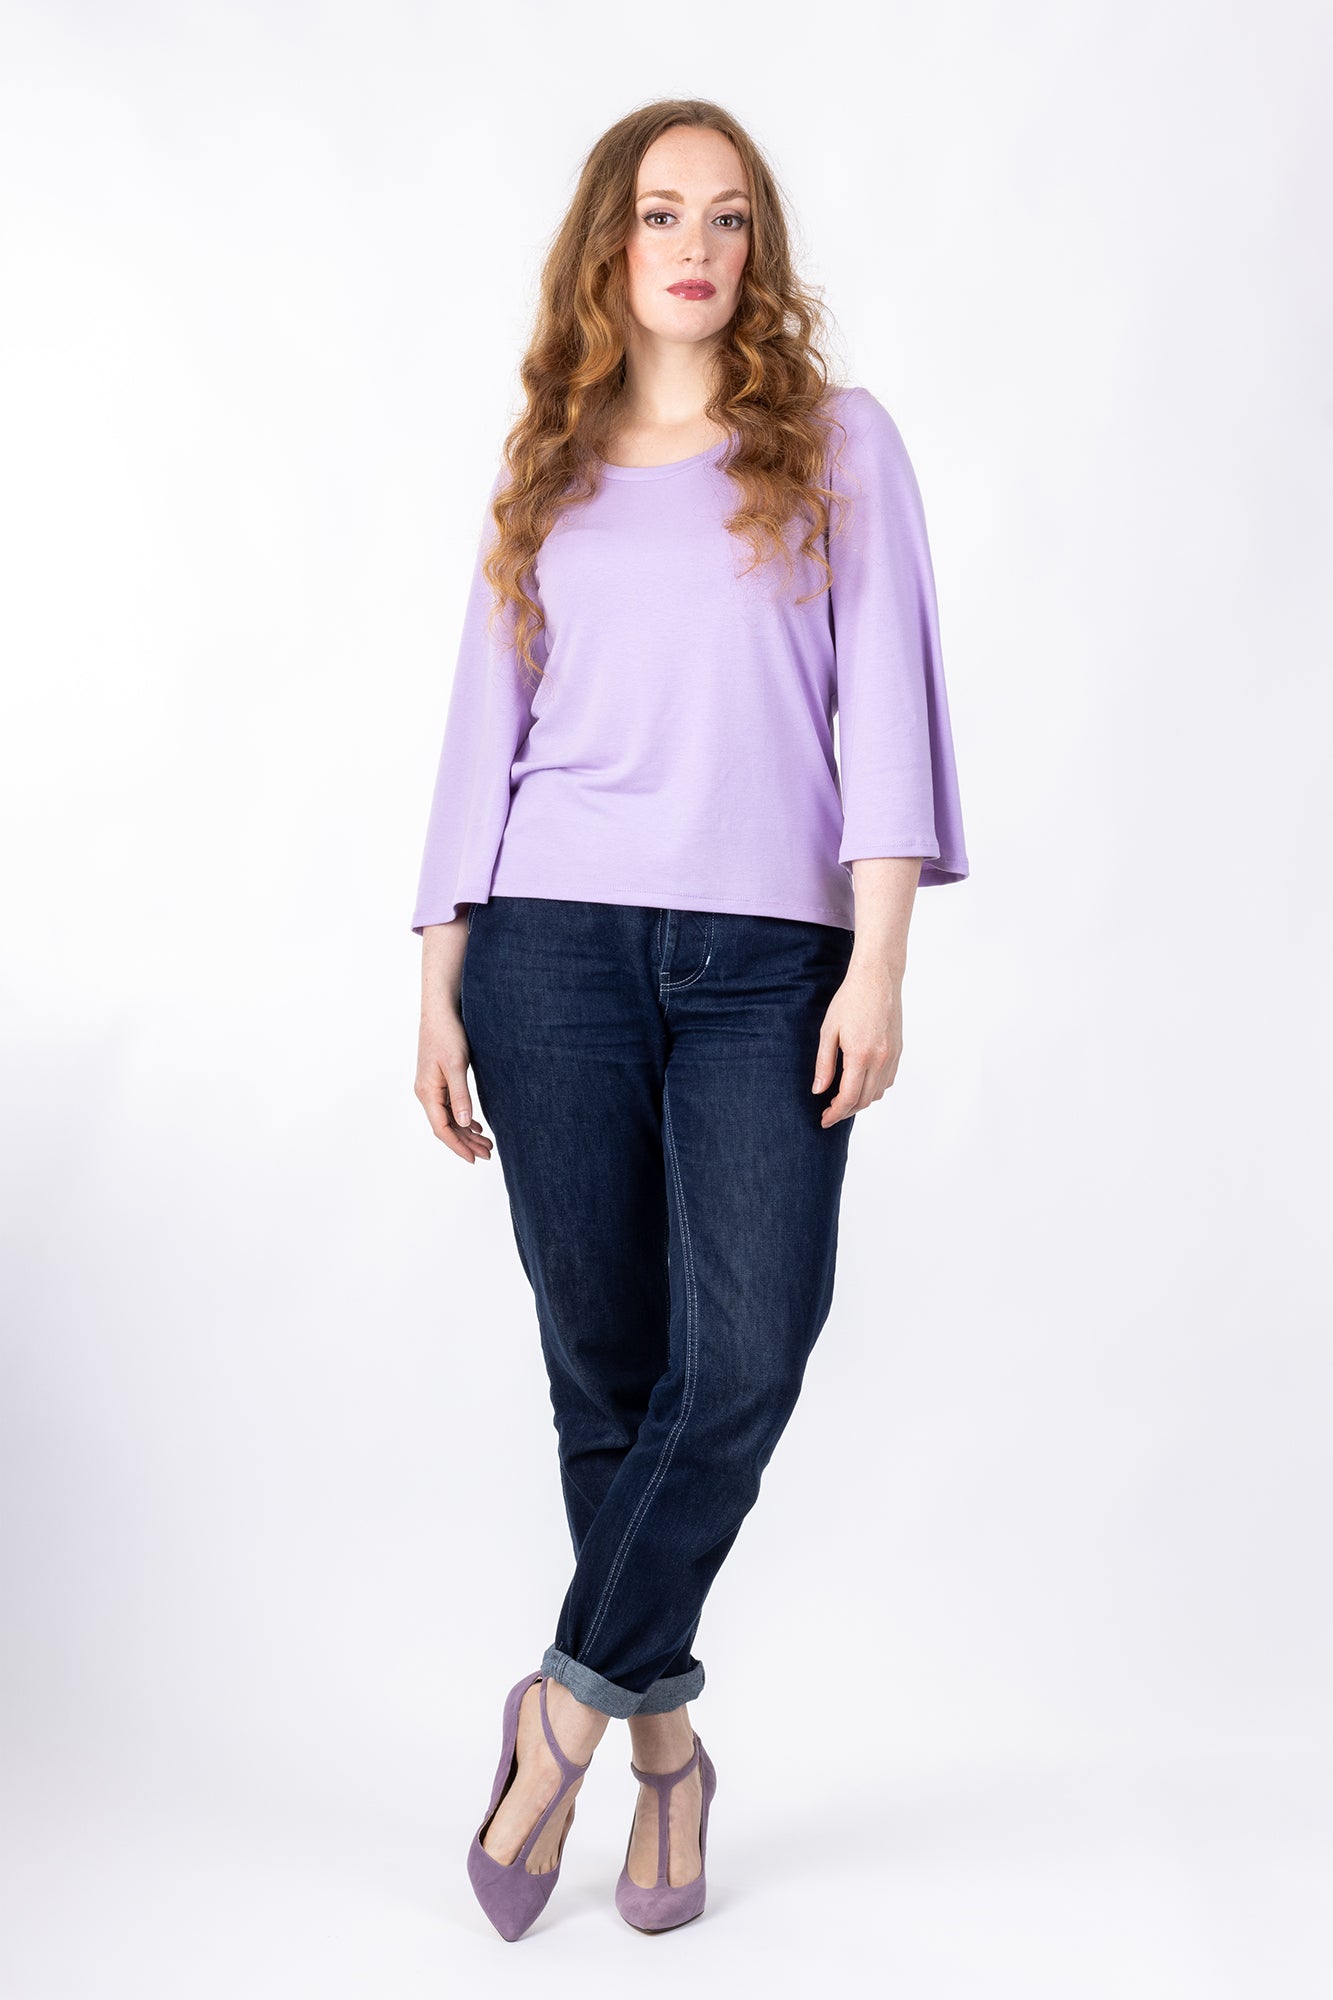 Scoop neck variant for Vera shirt, in lilac with wide three quarter sleeves, full front view